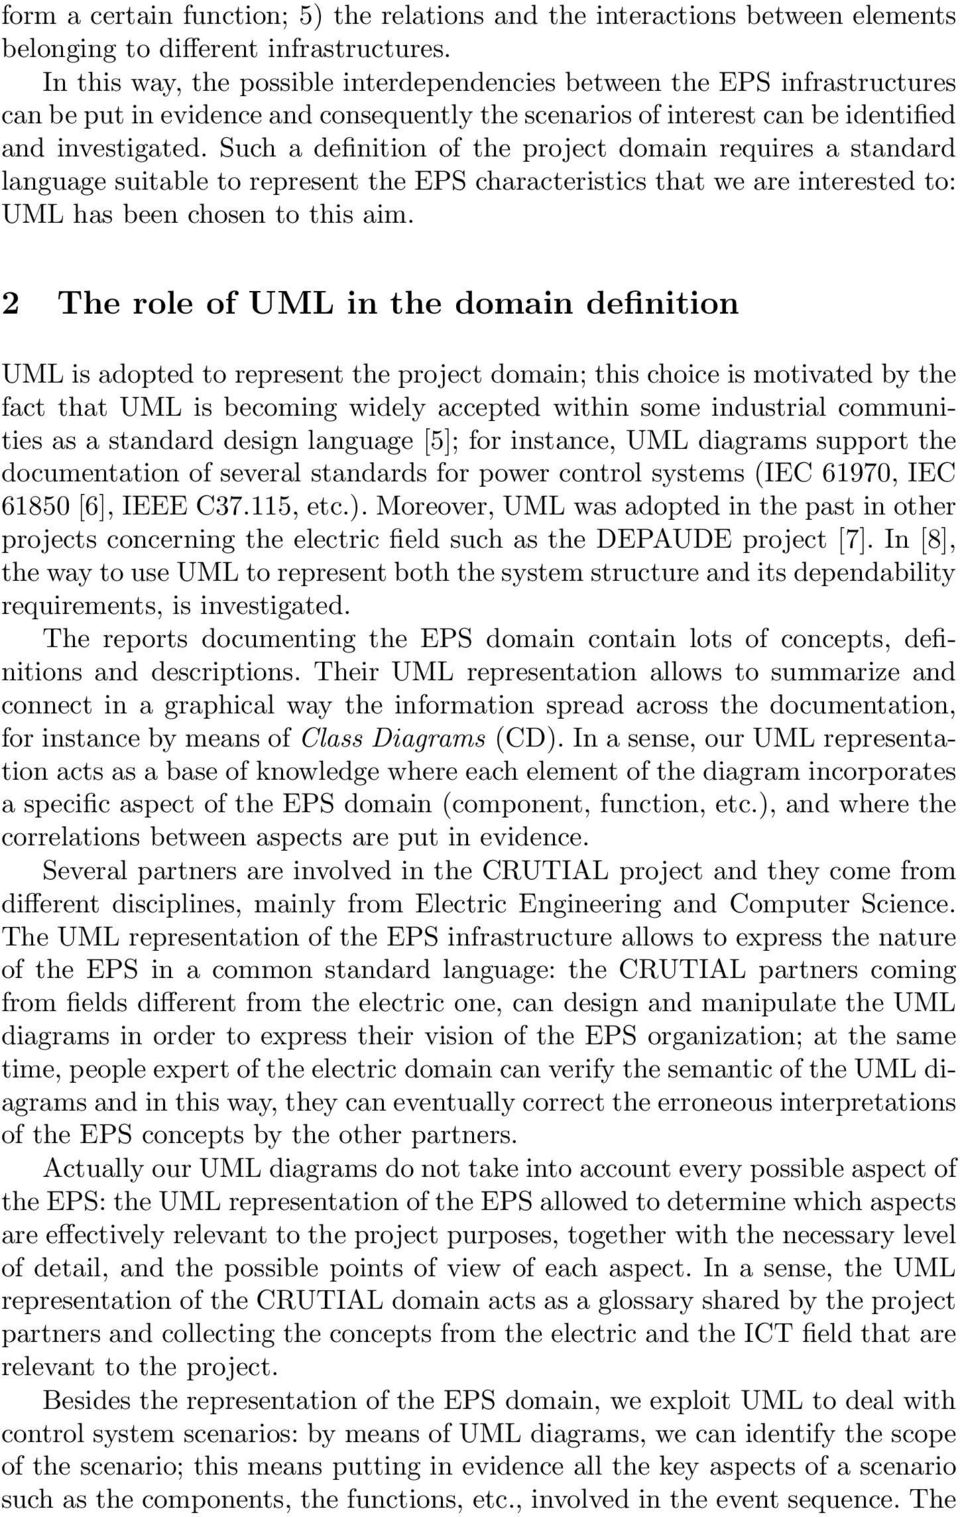 Such a definition of the project domain requires a standard language suitable to represent the EPS characteristics that we are interested to: UML has been chosen to this aim.